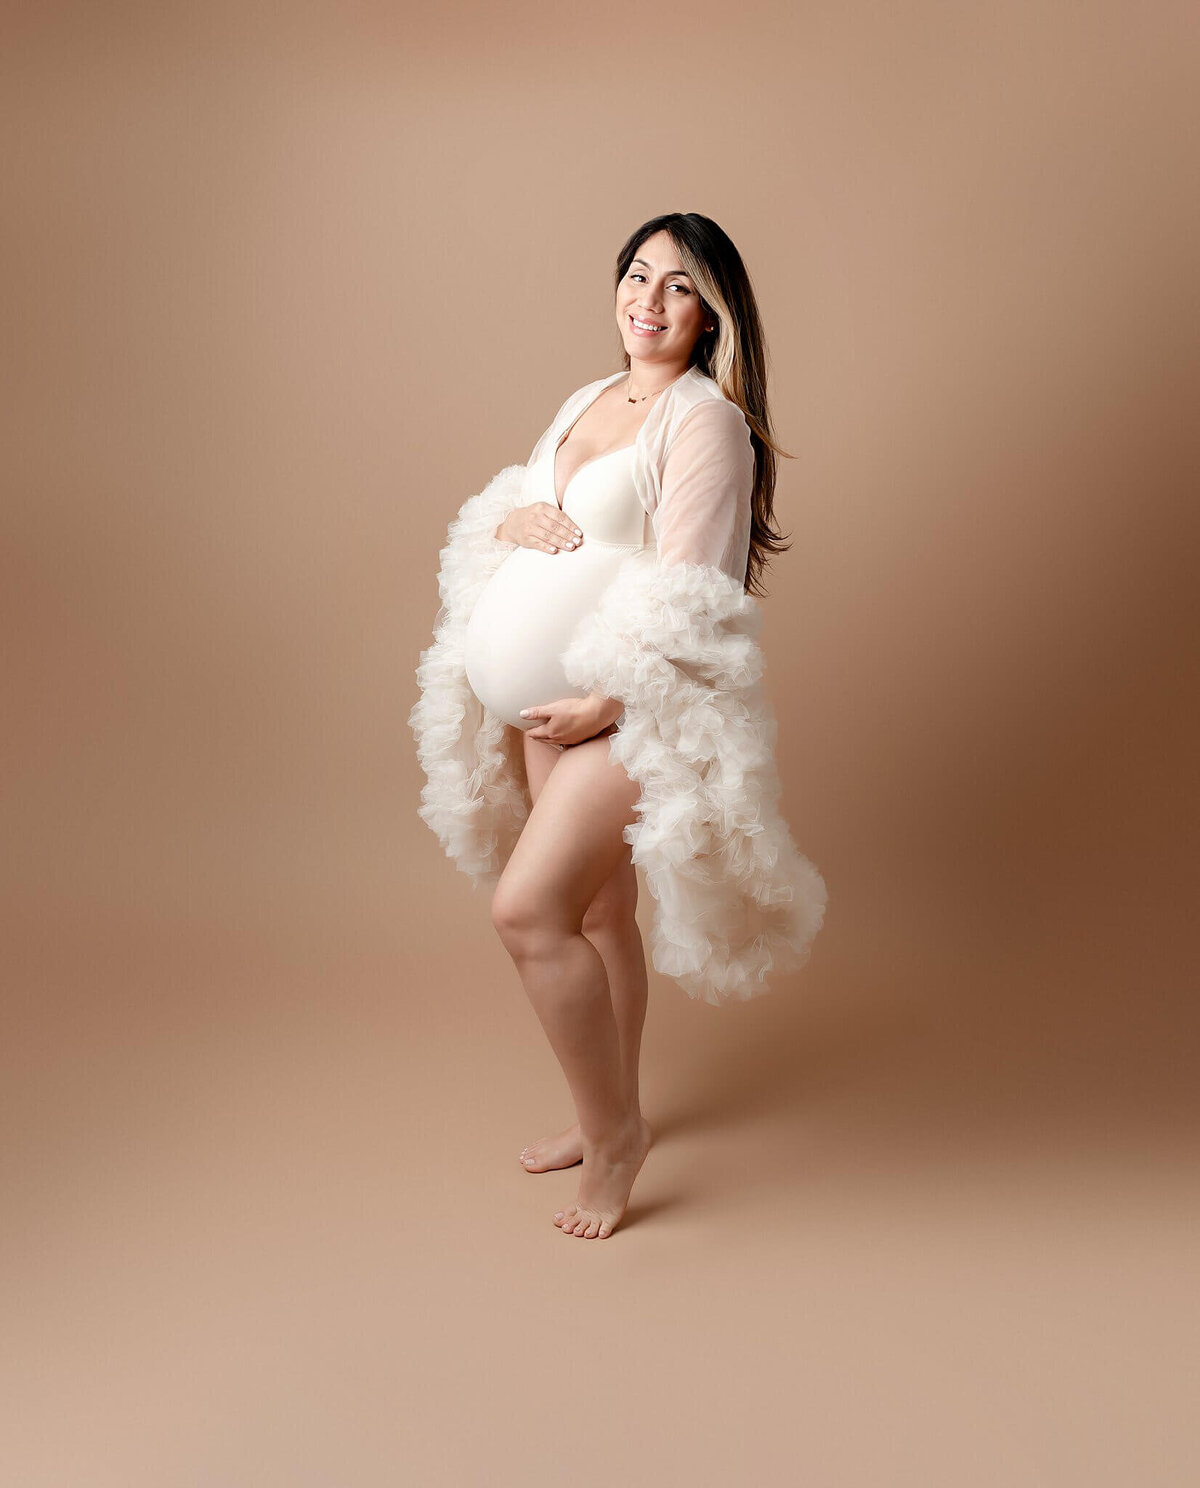 A stunning mom-to-be embracing her pregnancy in a chic Brooklyn studio session